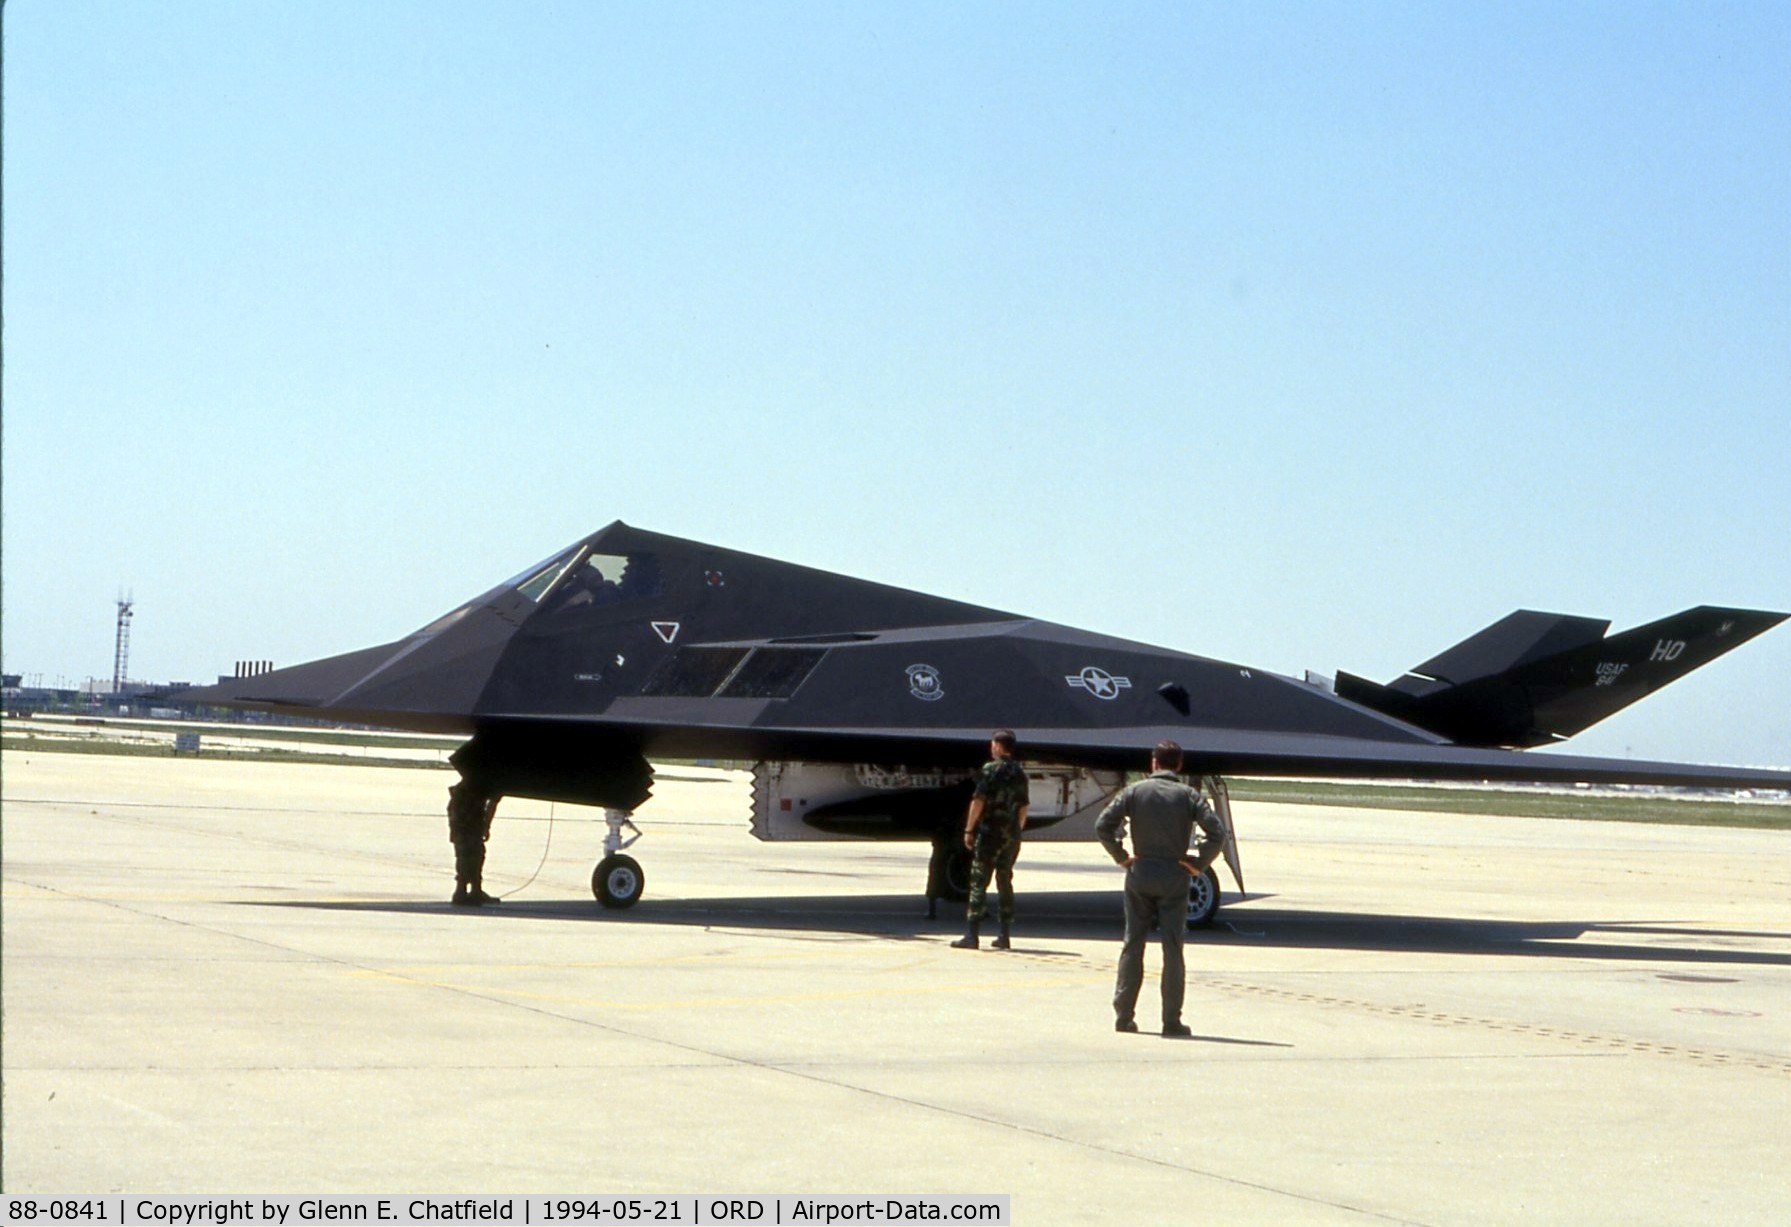 88-0841, 1988 Lockheed F-117A Nighthawk C/N A.4066, F-117A at the AFR/ANG open house